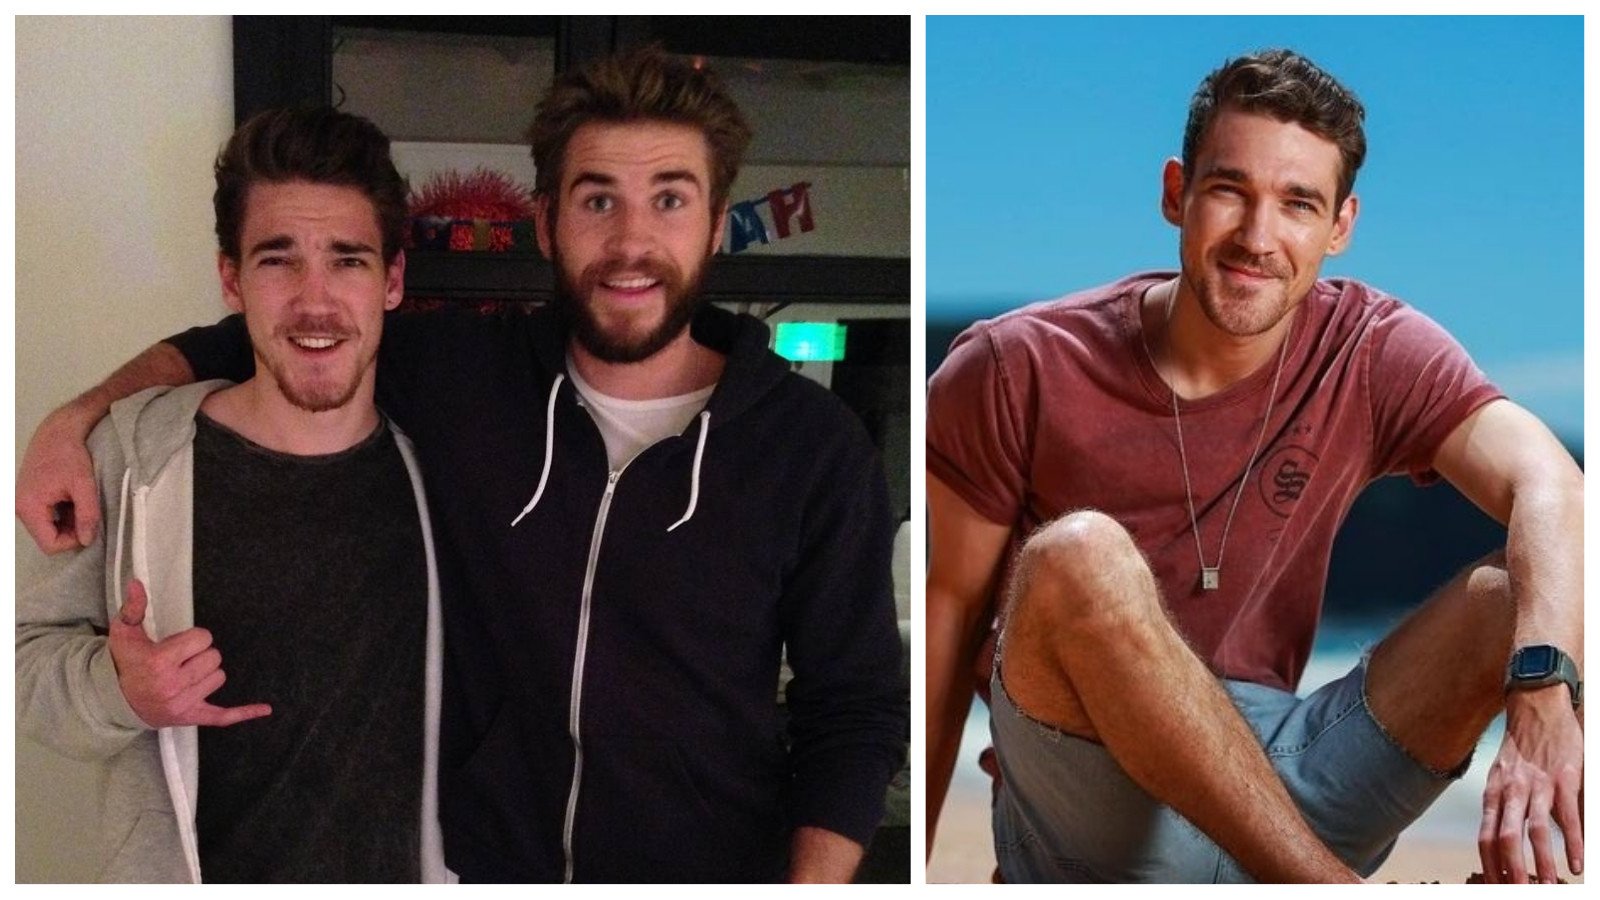 Meet Luke Van Os, the Hemsworth brothers’ cousin who is making his debut in Home and Away. Photos: @lukevanos/Instagram